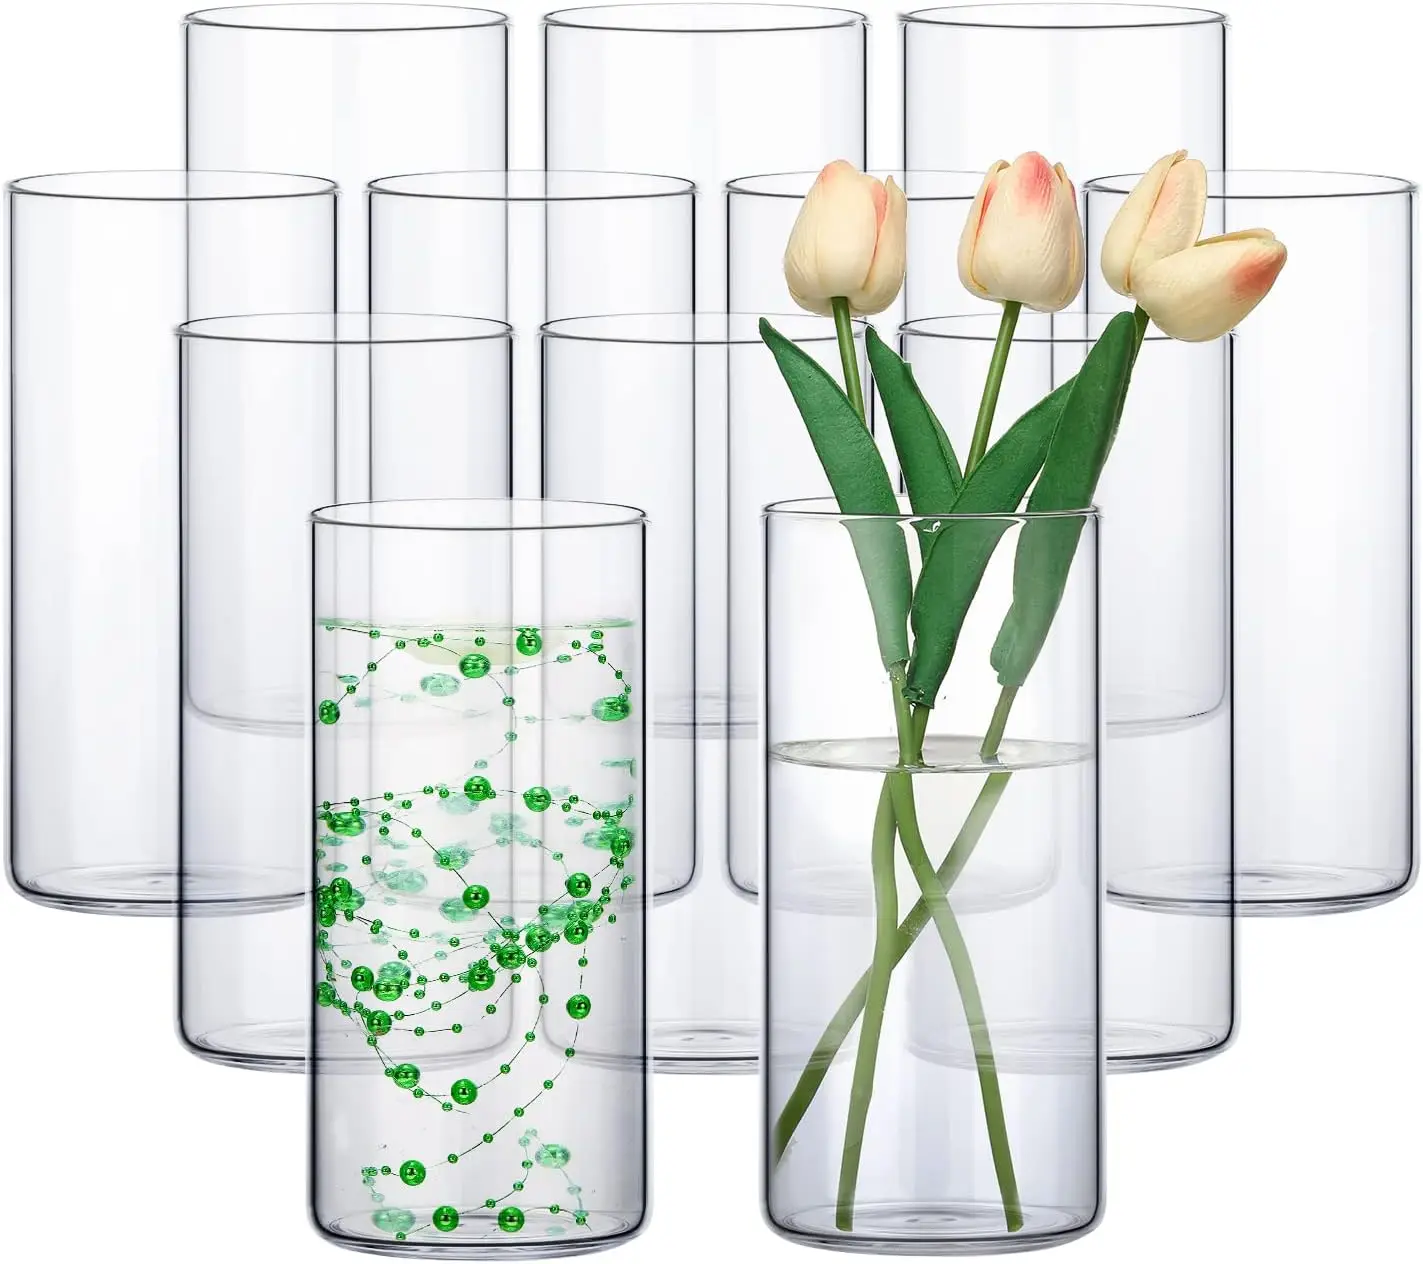 

12 Pack Glass Cylinder Vases Clear Flower Vase Tall Floating Candle Holders Centerpiece Vases Table Home Wedding Formal Dinners